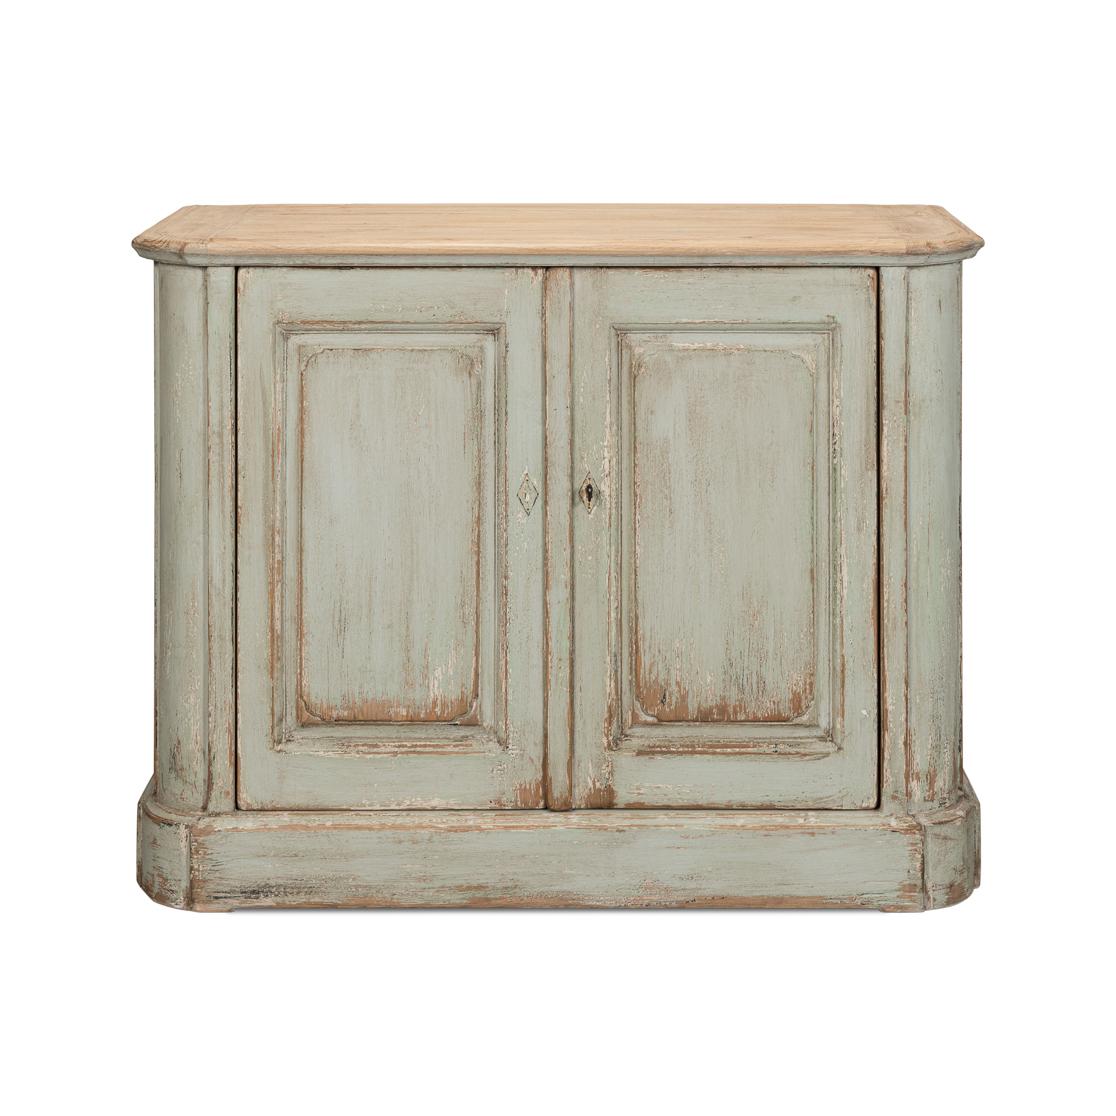 Reminiscent of a storied European past, this exquisite piece is crafted from reclaimed pine, it showcases a graceful antiqued sage-painted base and a natural finished wood top, lending it a serene country style with rustic elegance.

Perfectly sized